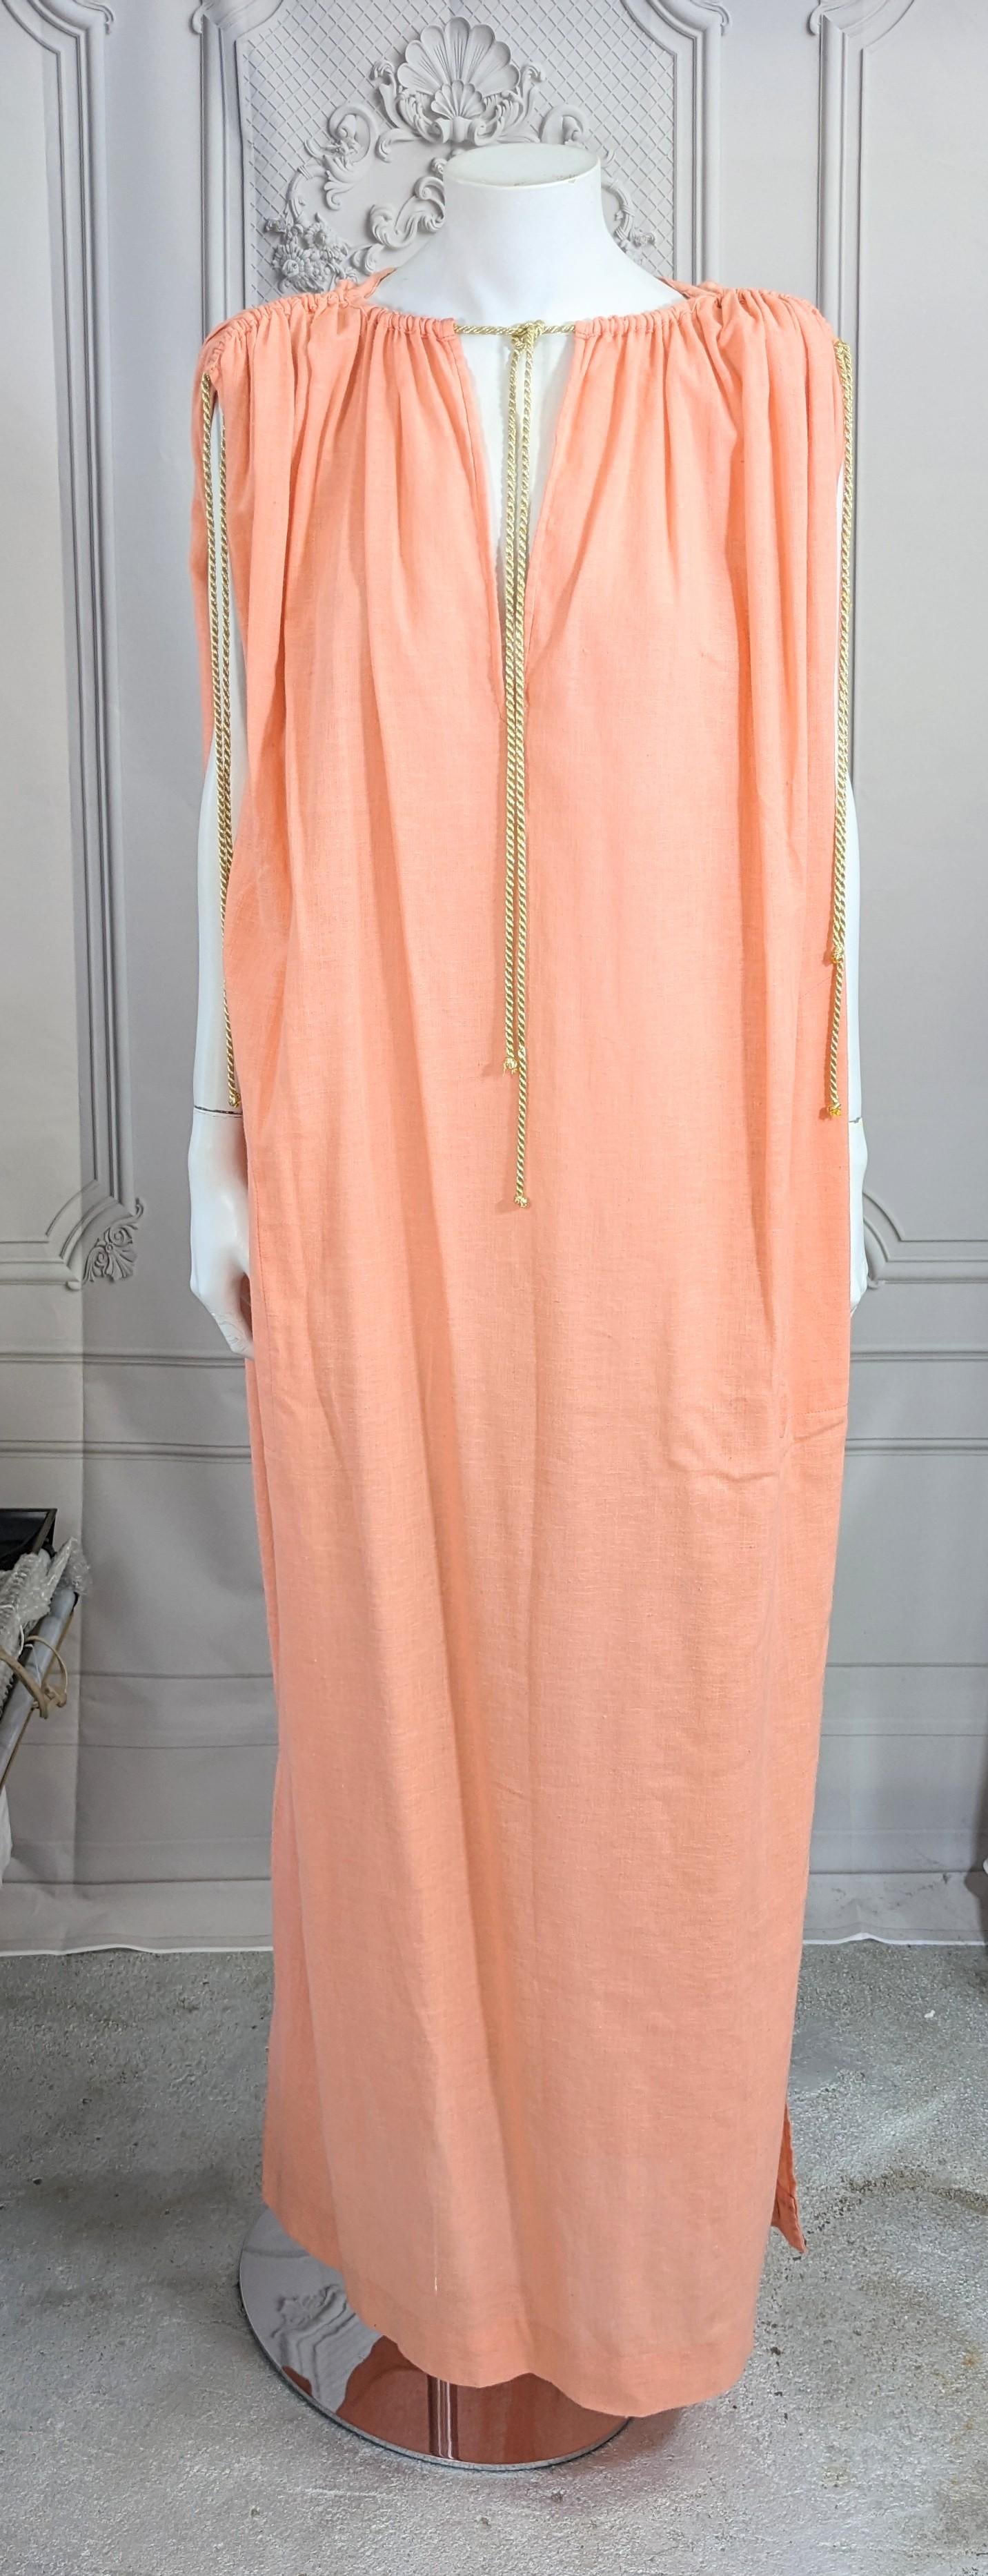 Rare Yves Saint Laurent Rive Gauche Early Peach Gauze Toga from the 1970's. Pale peach cotton gauze is simply gathered with gold lame cords at shoulder and neckline. YSL in this time period was creating the important timeless codes of the YSL house